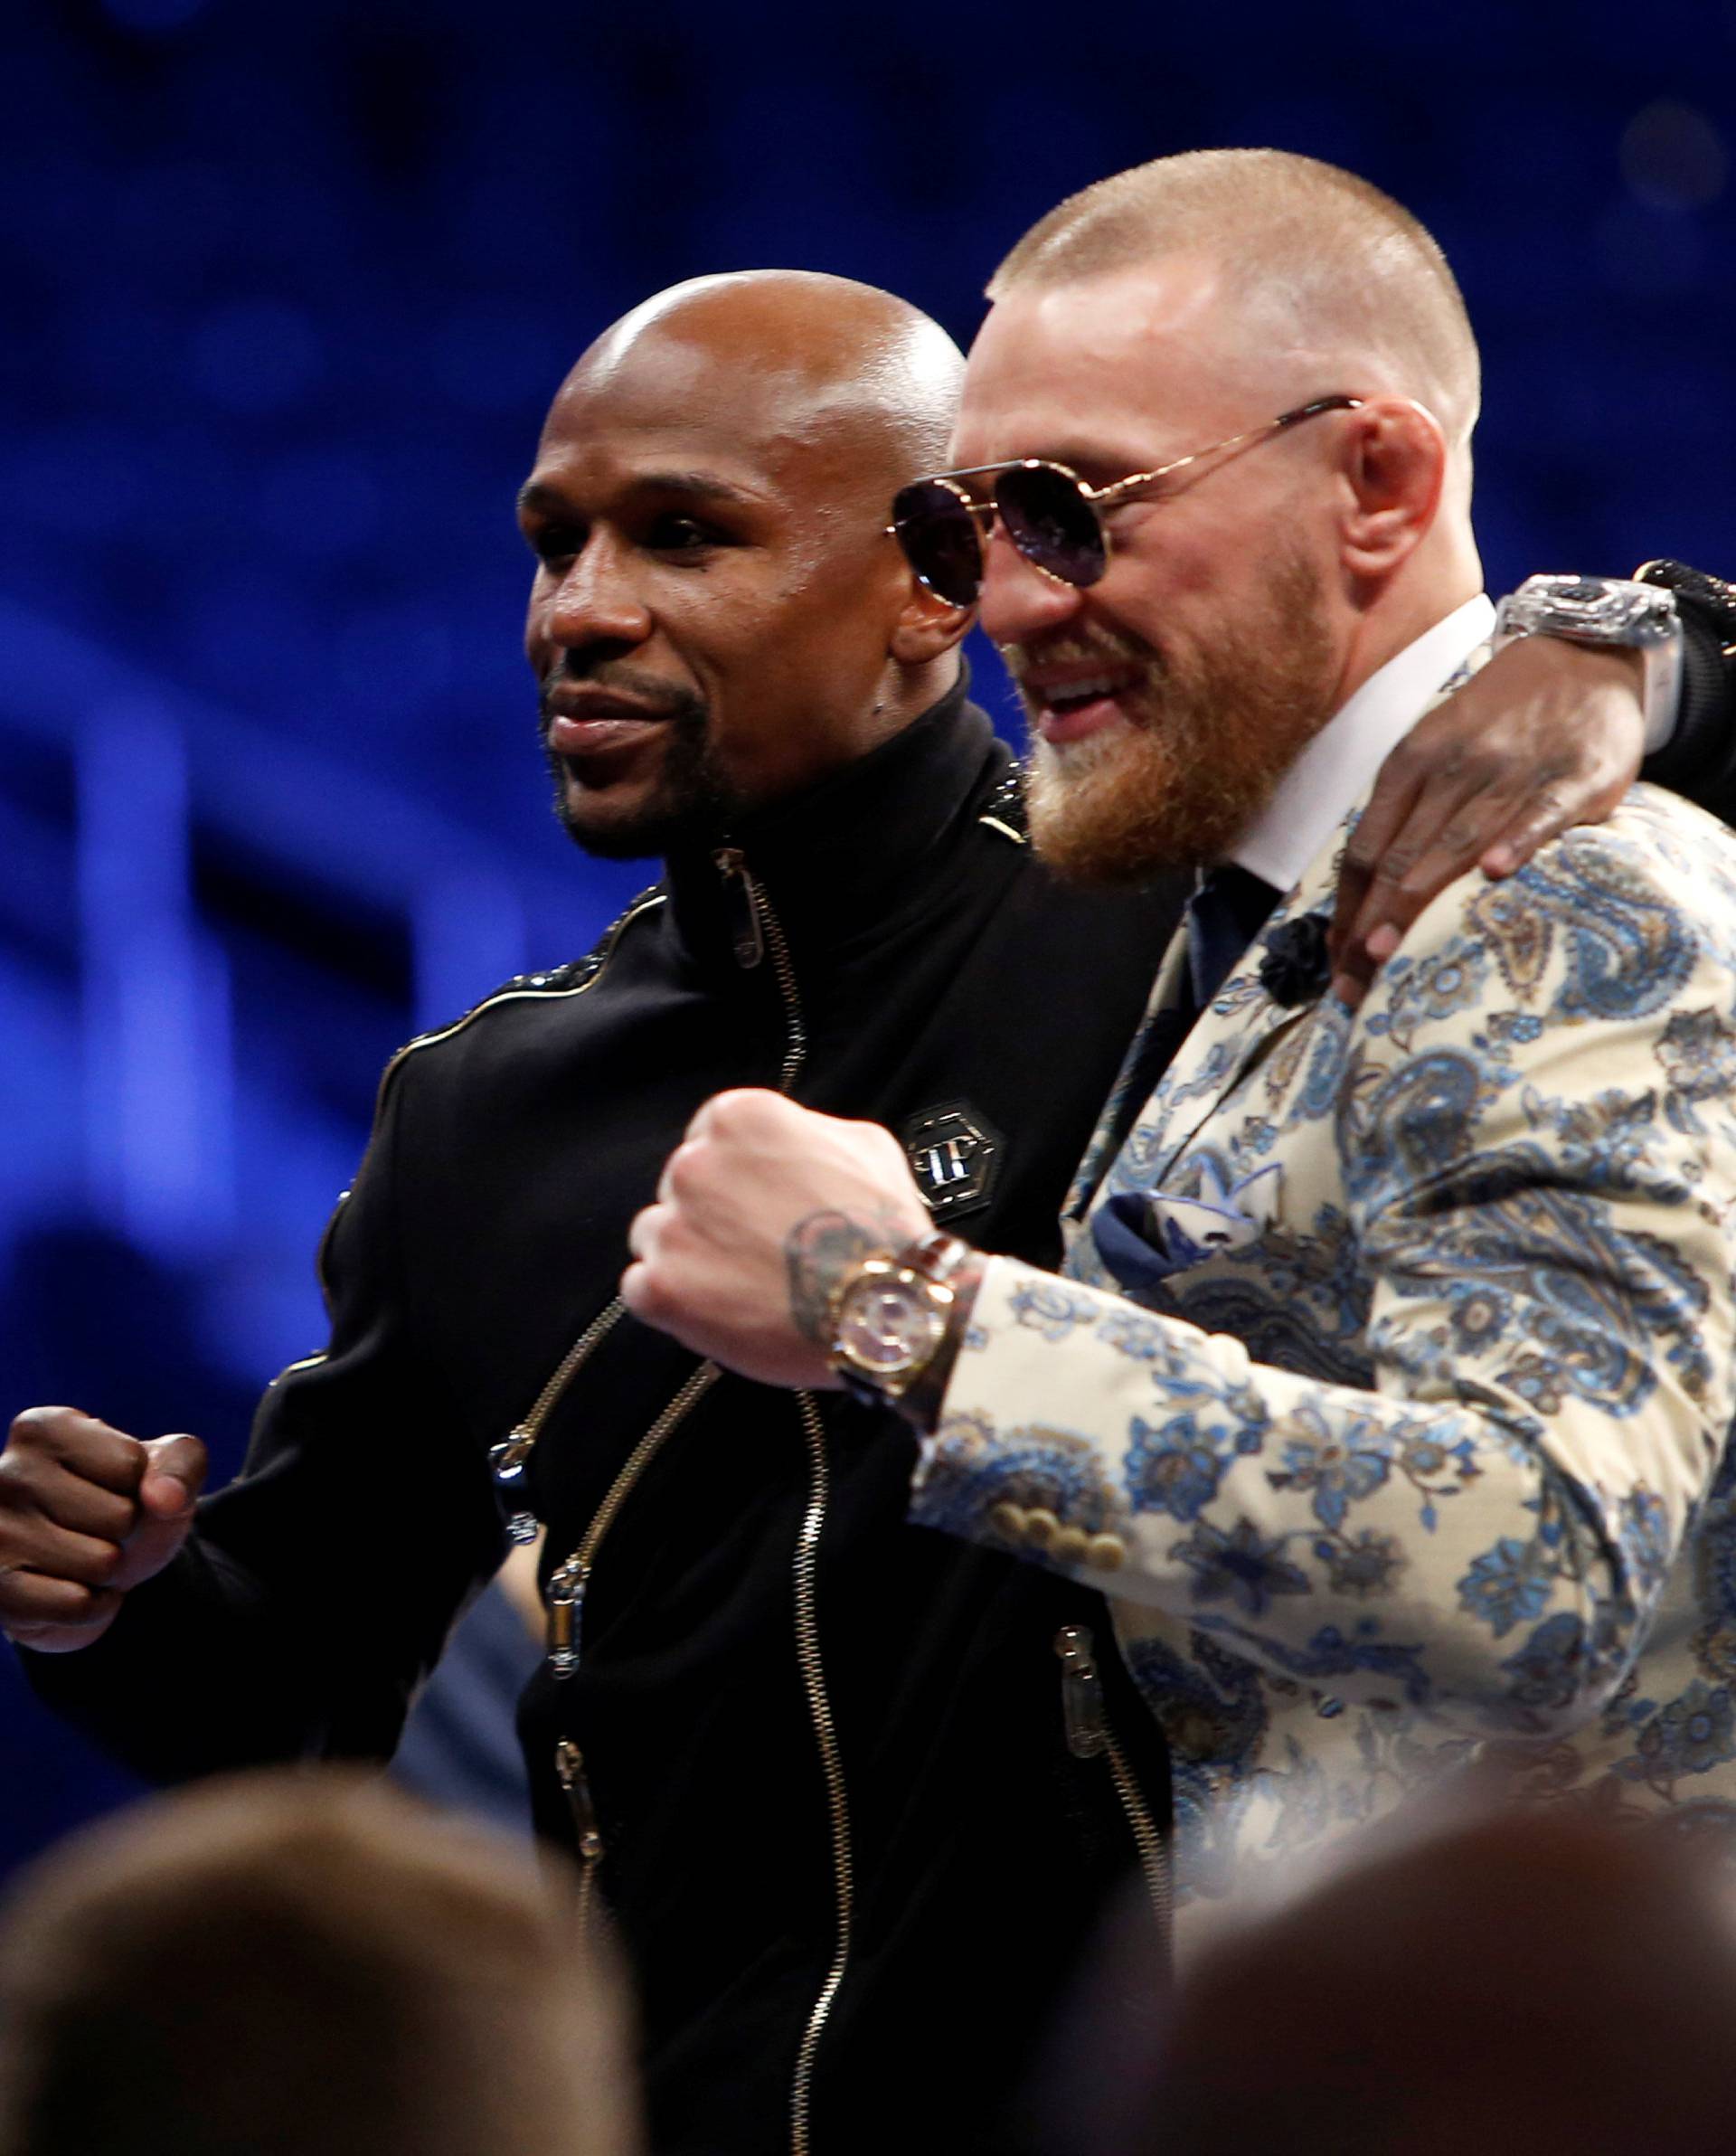 Undefeated boxer Floyd Mayweather Jr. (L) of the U.S. and UFC lightweight champion Conor McGregor of Ireland pose during post-fight news conference at T-Mobile Arena in Las Vegas